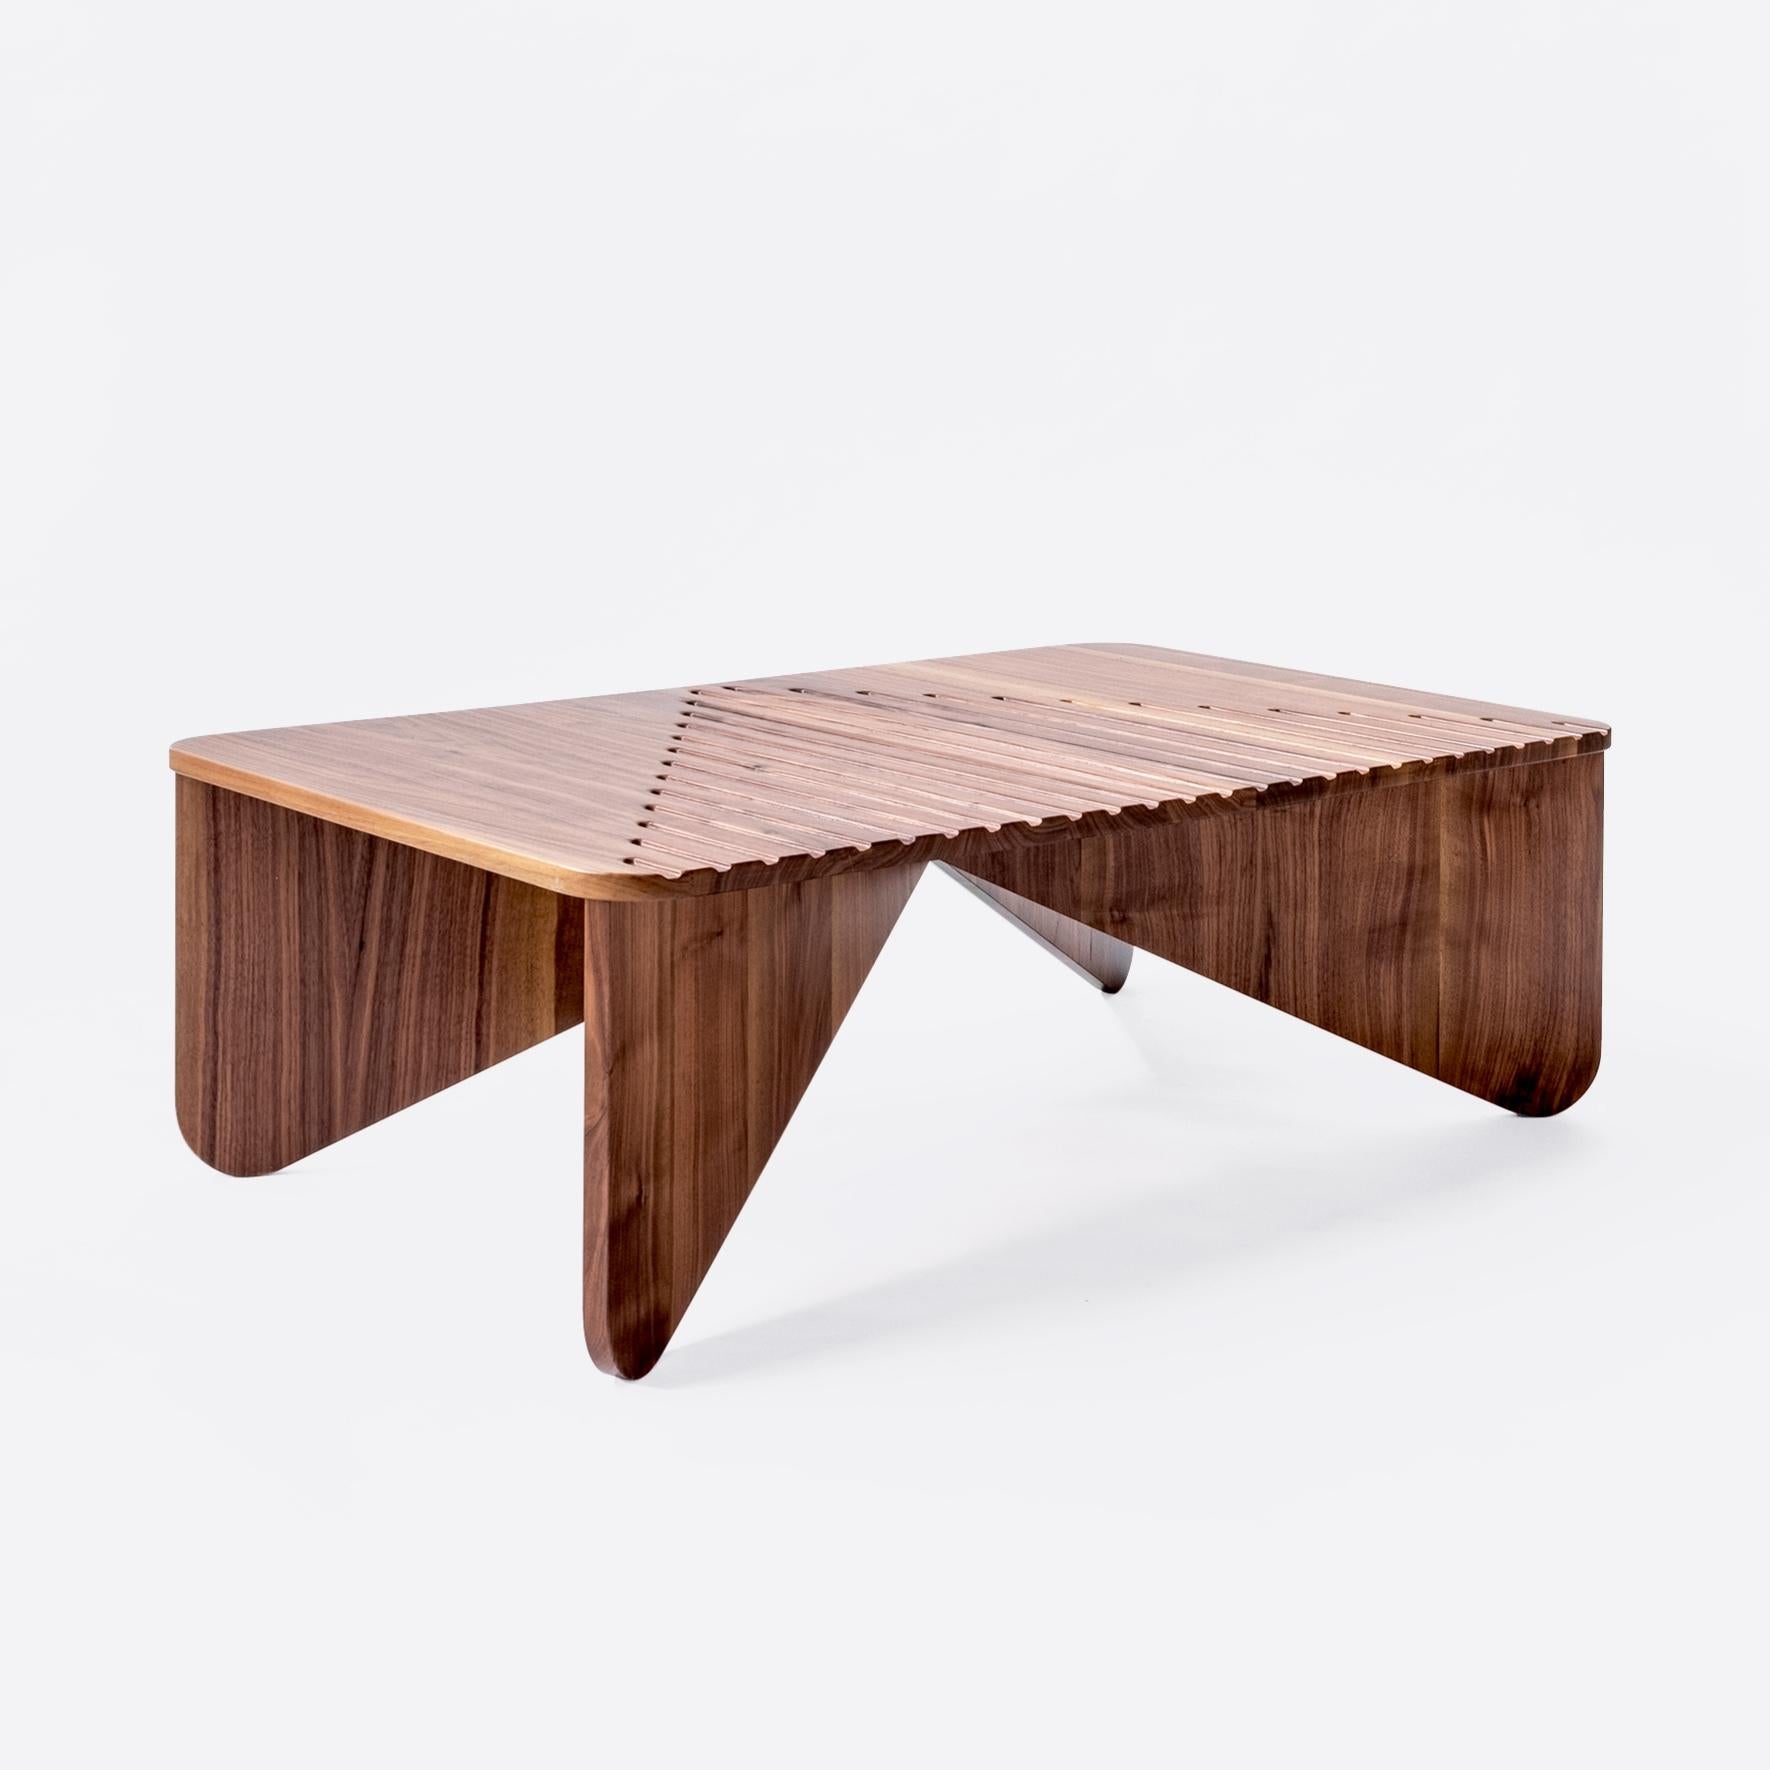 Yoko collection designed by Serena Confalo-
nieri for Medulum consists of 3 wooden coffee tables.
The pieces are characterized by the repetition of trian-
gular elements, which visually refer to the Japanese art 
of origami.
This recourse to